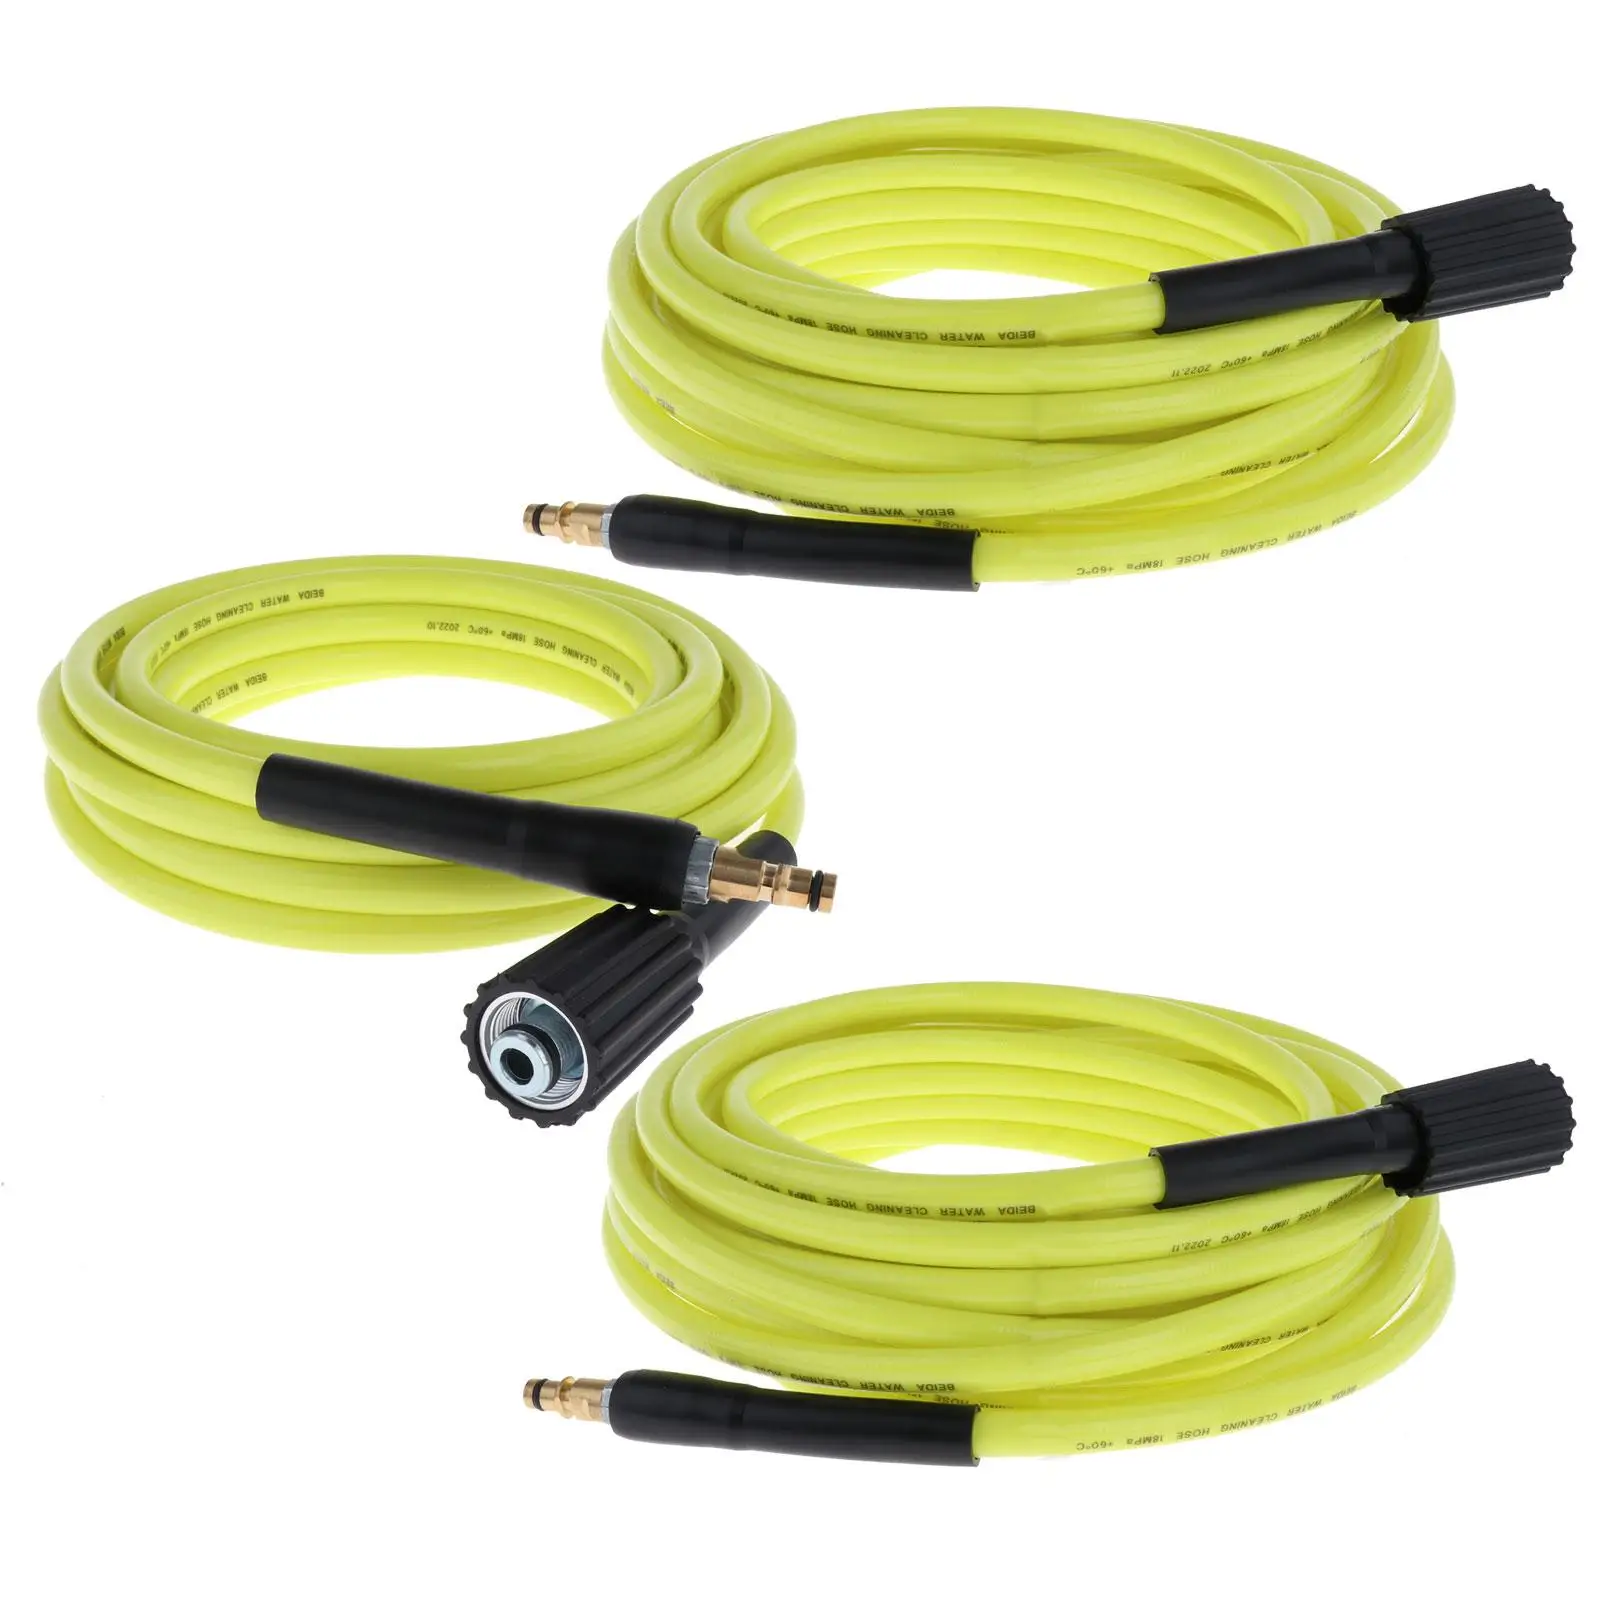 Pressure Washer Hose 2360 PSI Devices Replace Durable Watering Pipe Hose for Garden Lawn Cleaner for K Series K2 K3 K4 K5 K6 K7